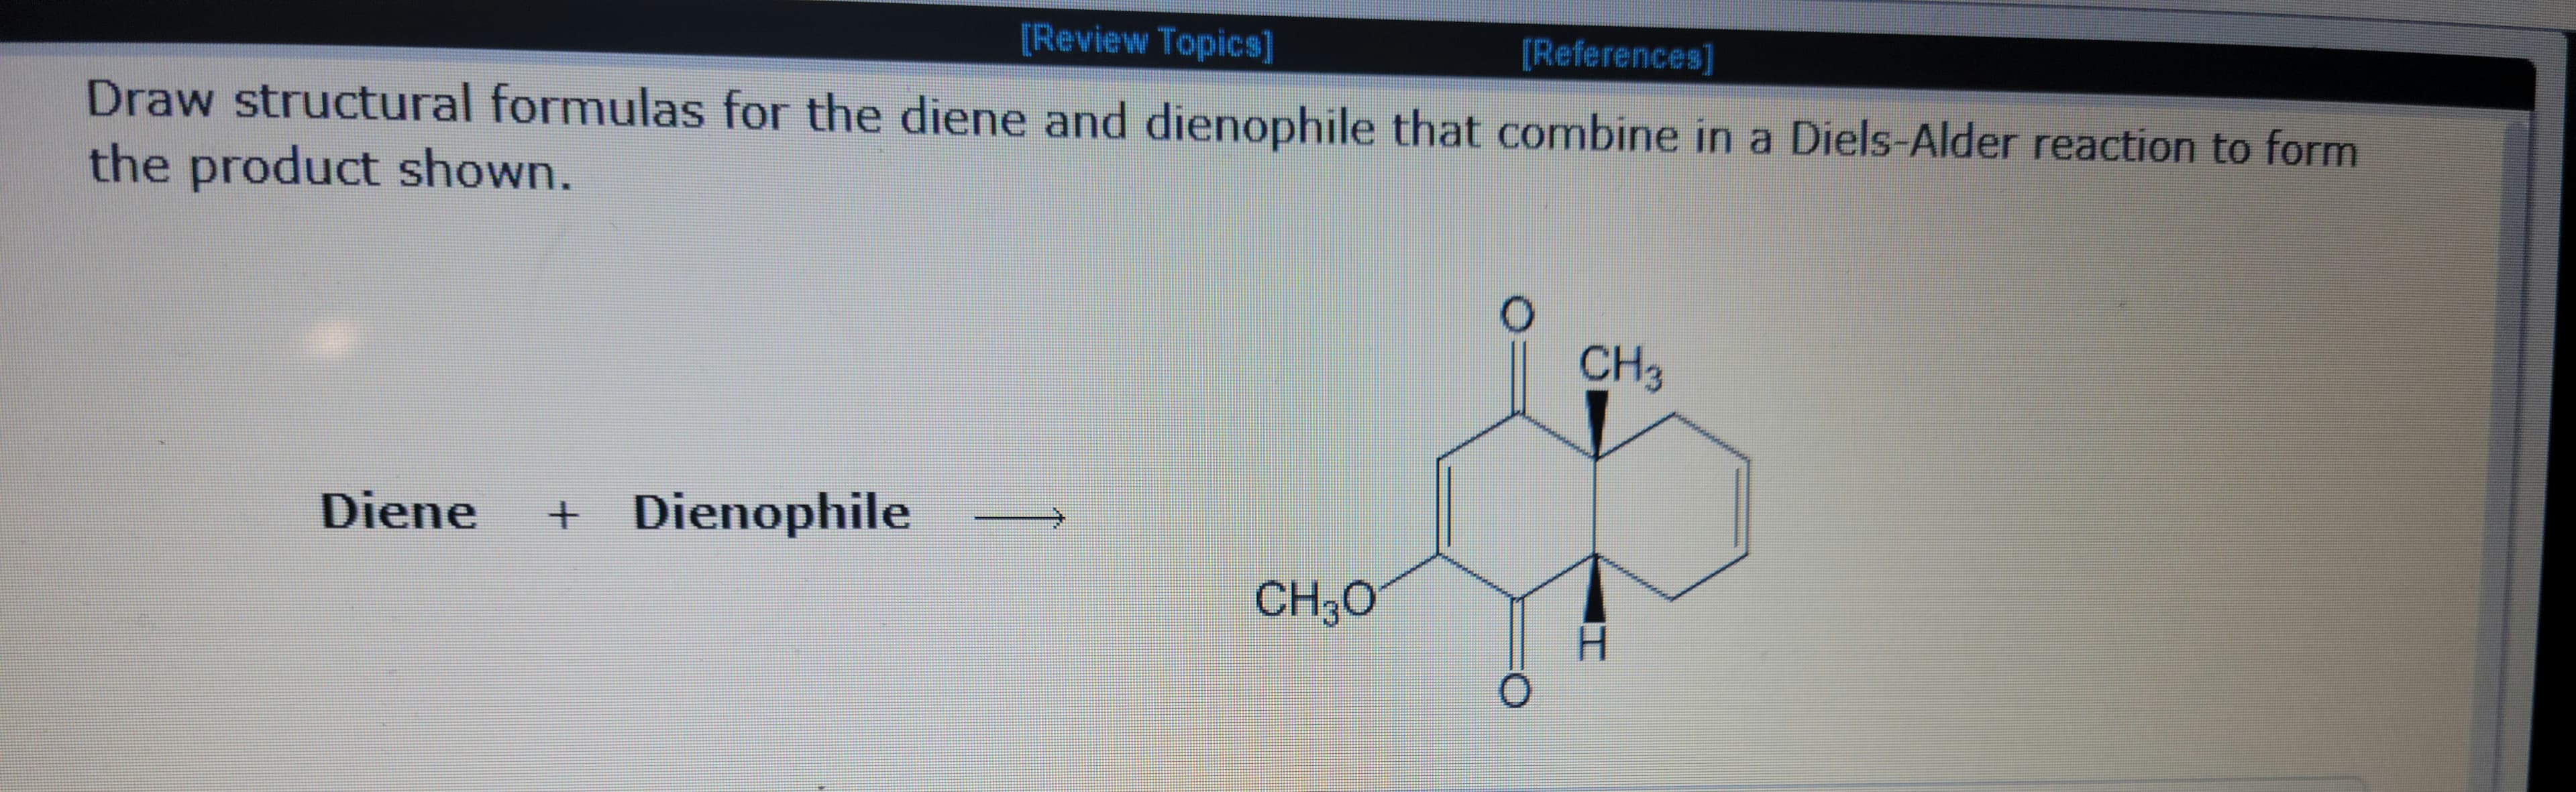 [Review Topics]
[References]
Draw structural formulas for the diene and dienophile that combine in a Diels-Alder reaction to form
the product shown.
Diene + Dienophile
CH3O
CH₂
I
wwwwwww